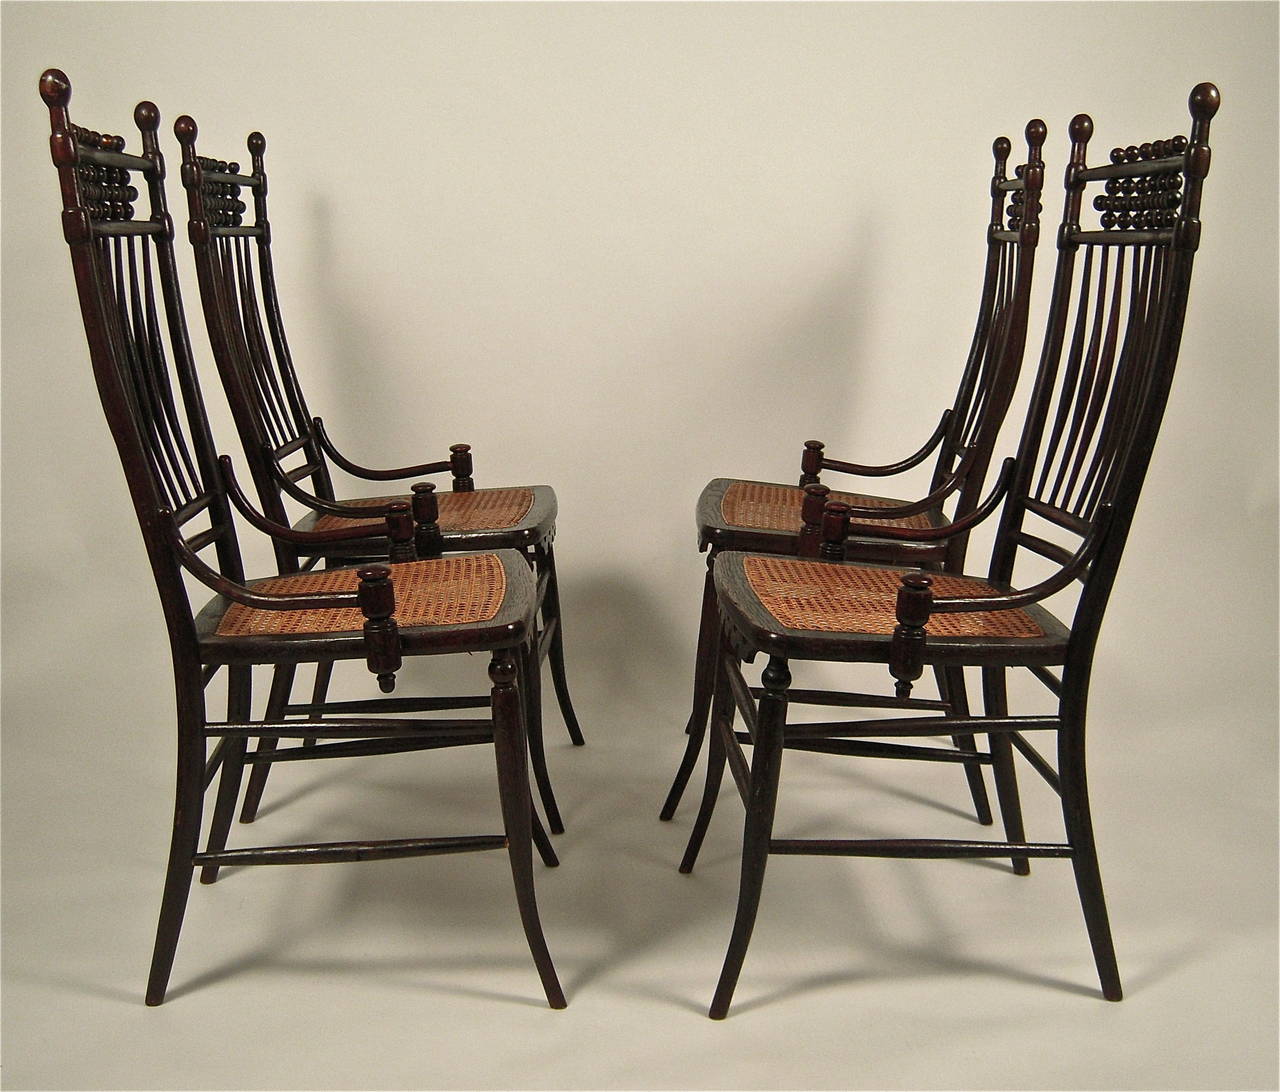 Set of Four Unusual, Graphic Aesthetic Movement Period Chairs 1